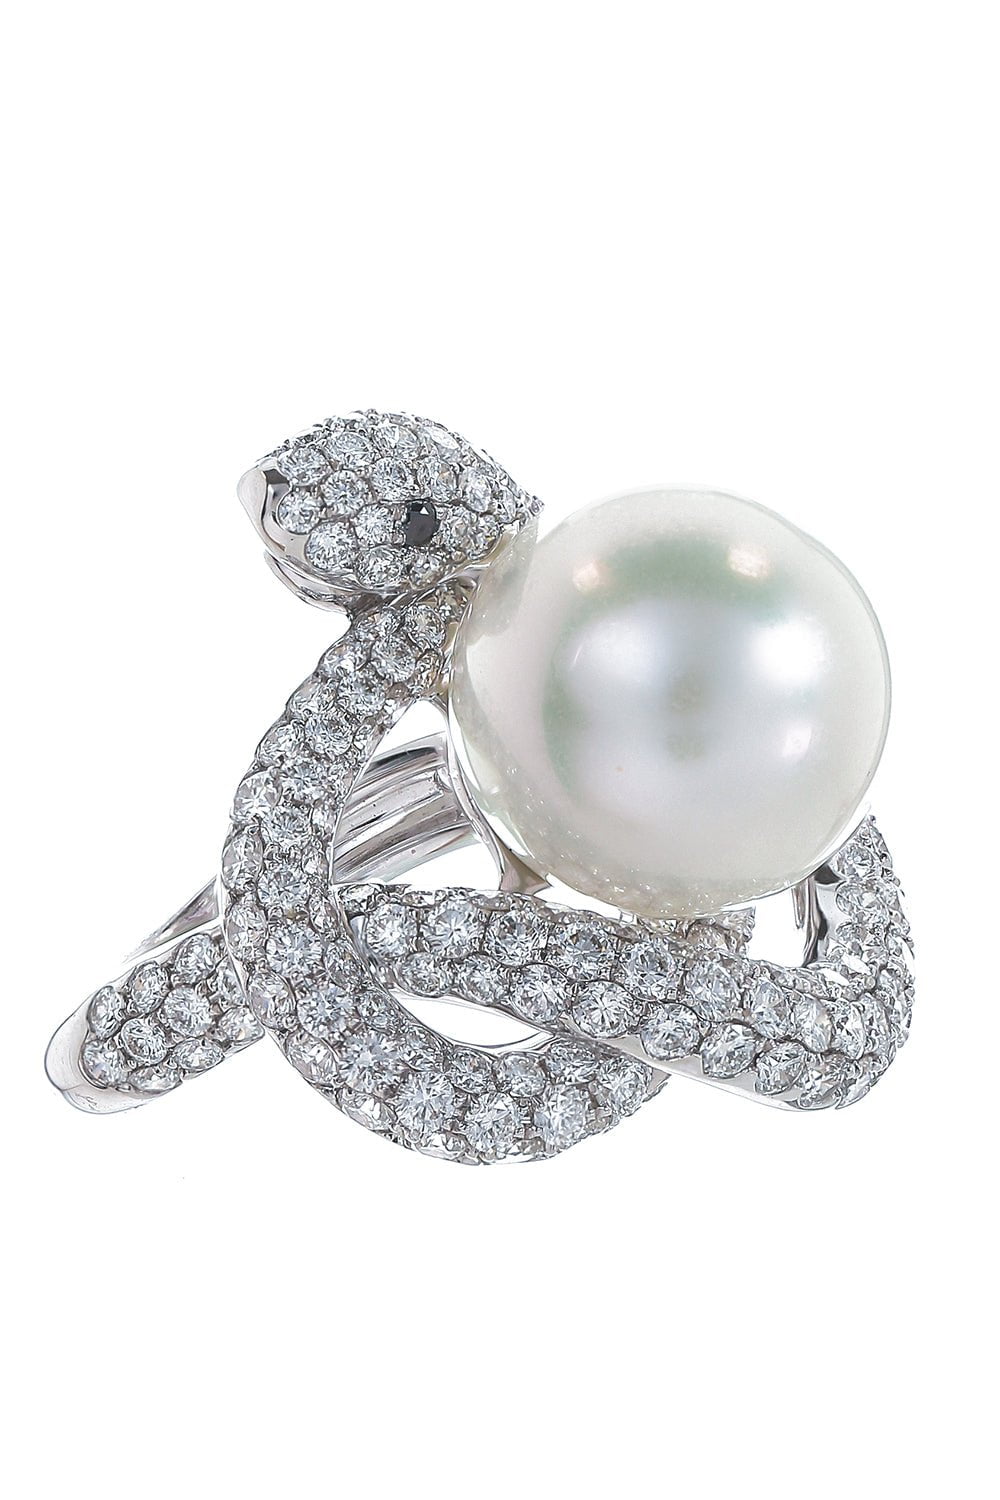 STEFERE-South Sea Pearl Diamond Snake Ring-WHITE GOLD